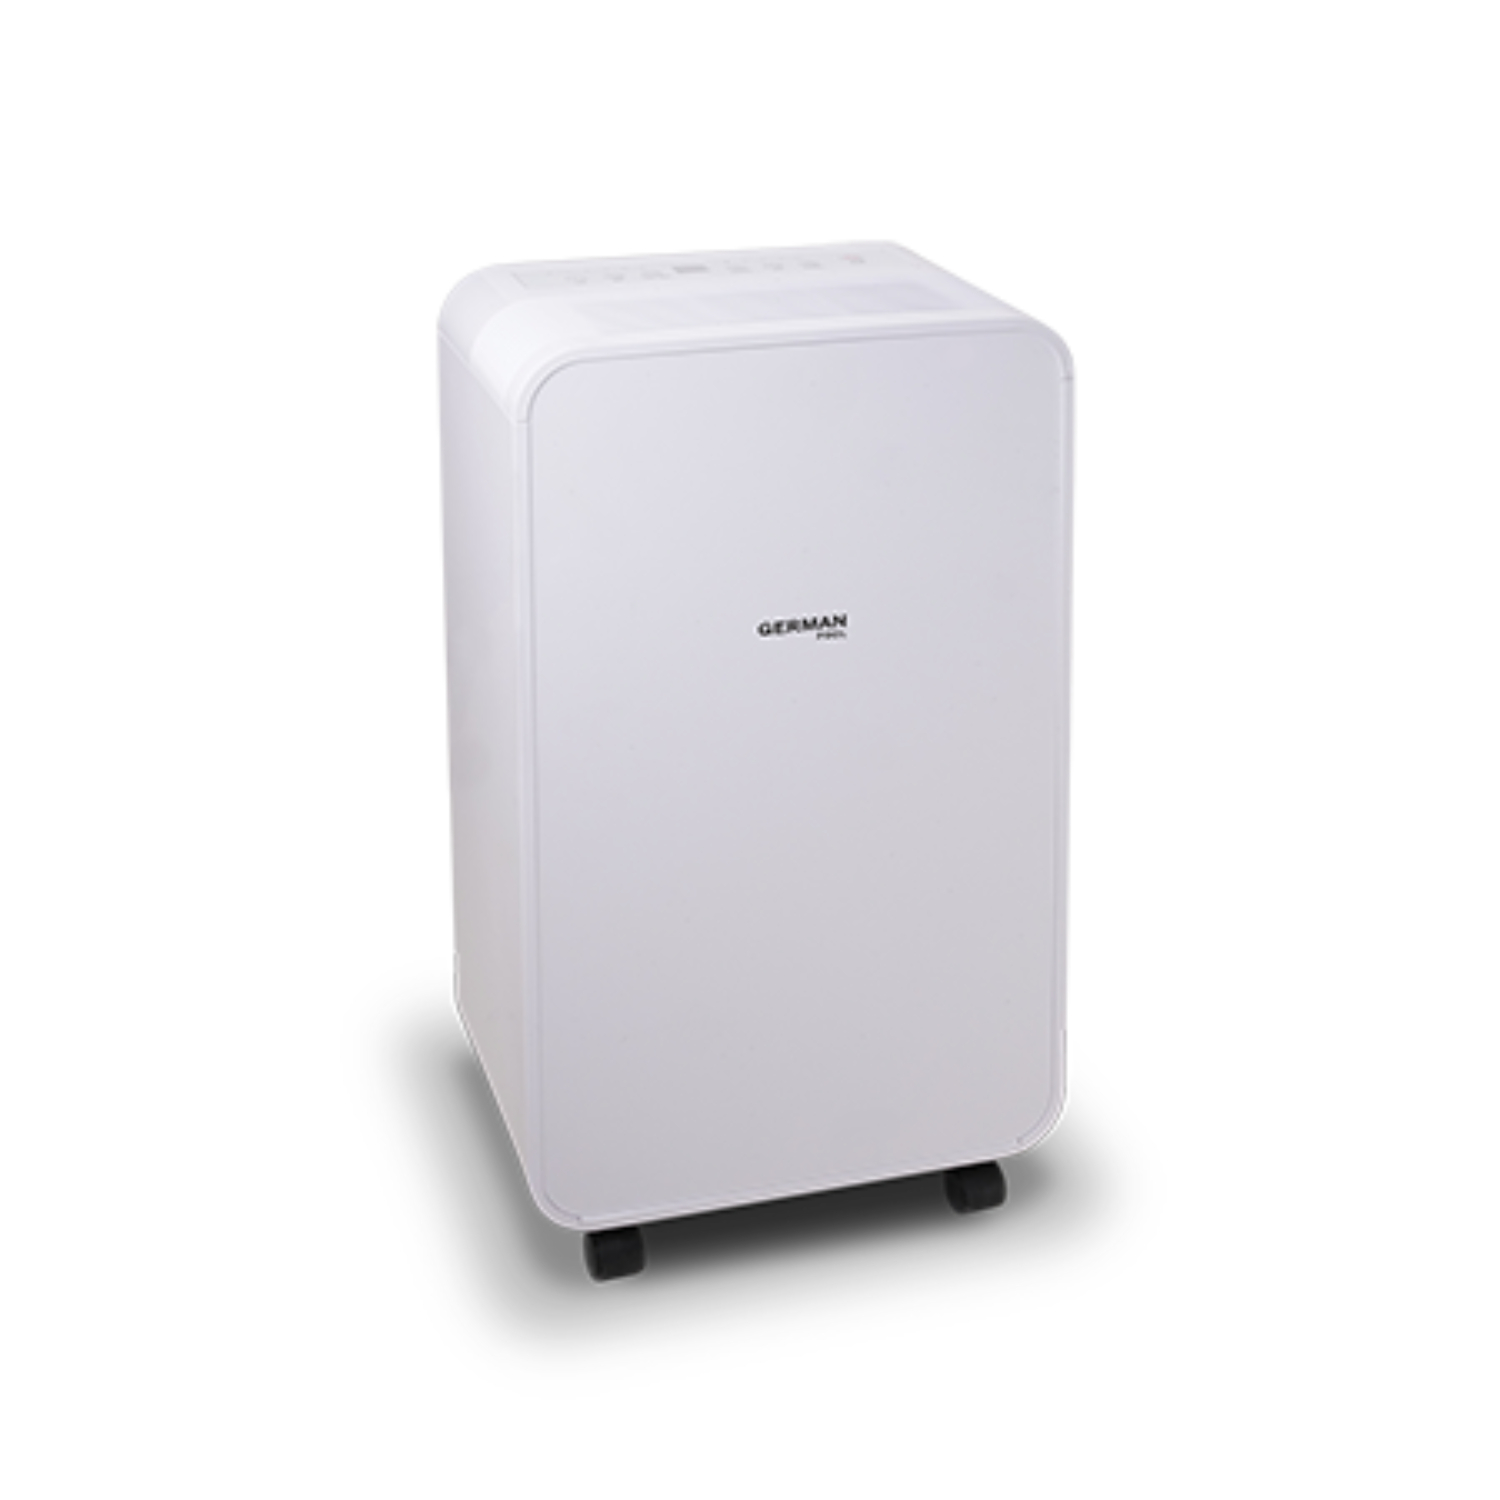 German pool WiFi Smart Air Purifying Dehumidifier (DHM-807-SC-WT), , large image number 3